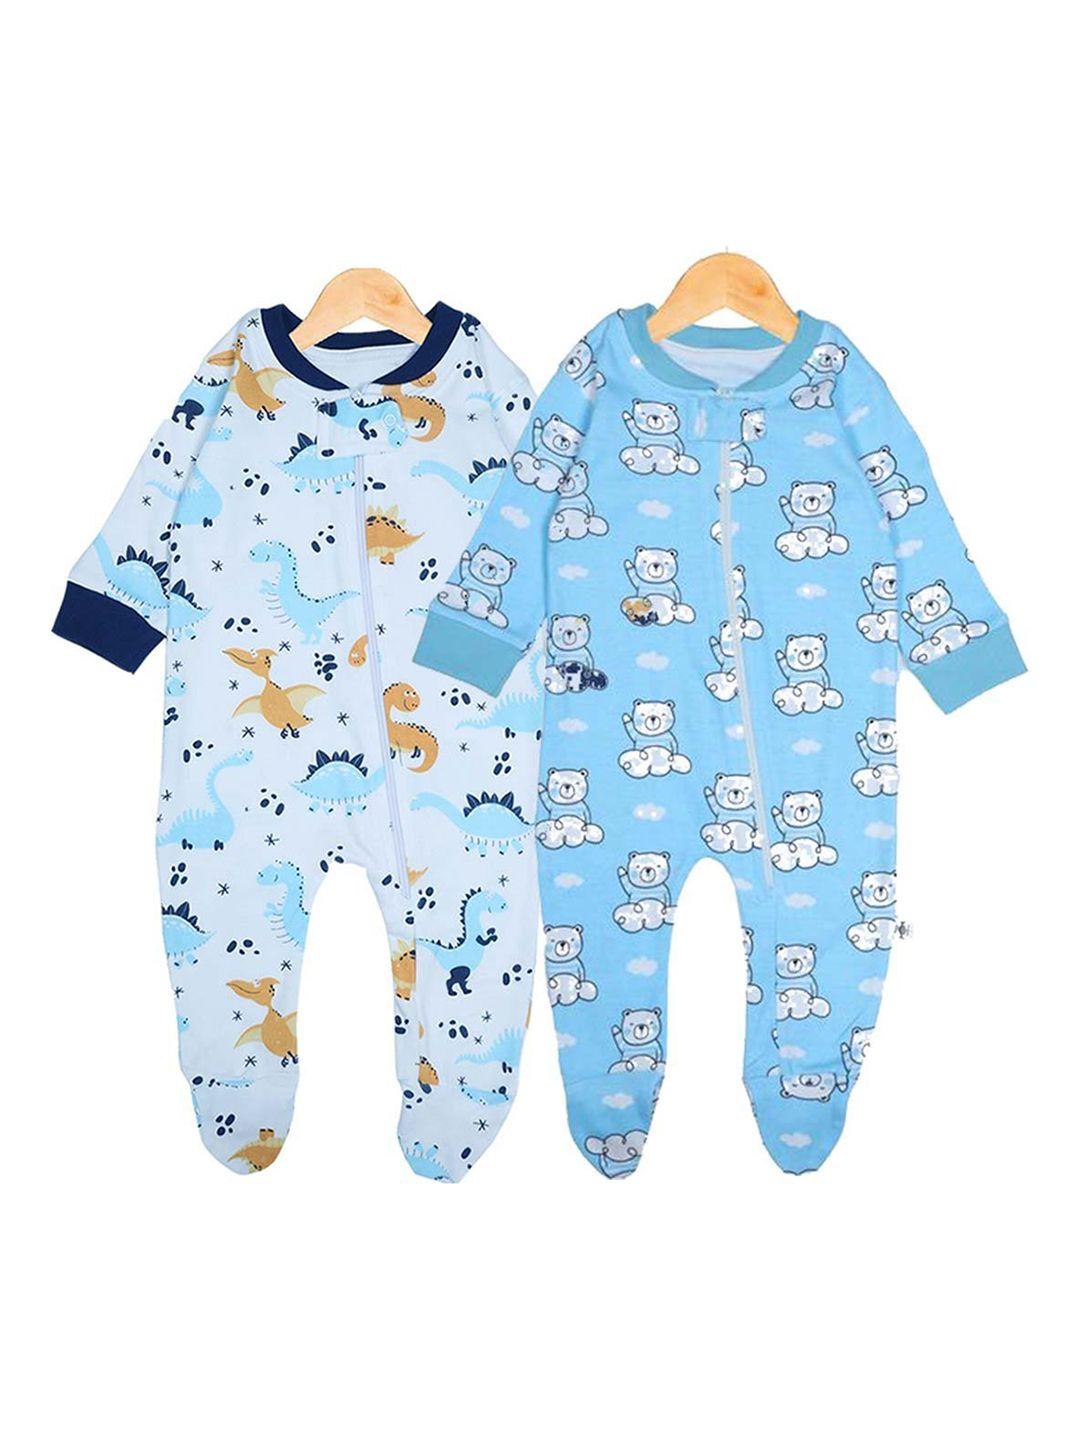 the mom store kids set of 2 blue printed cotton rompers